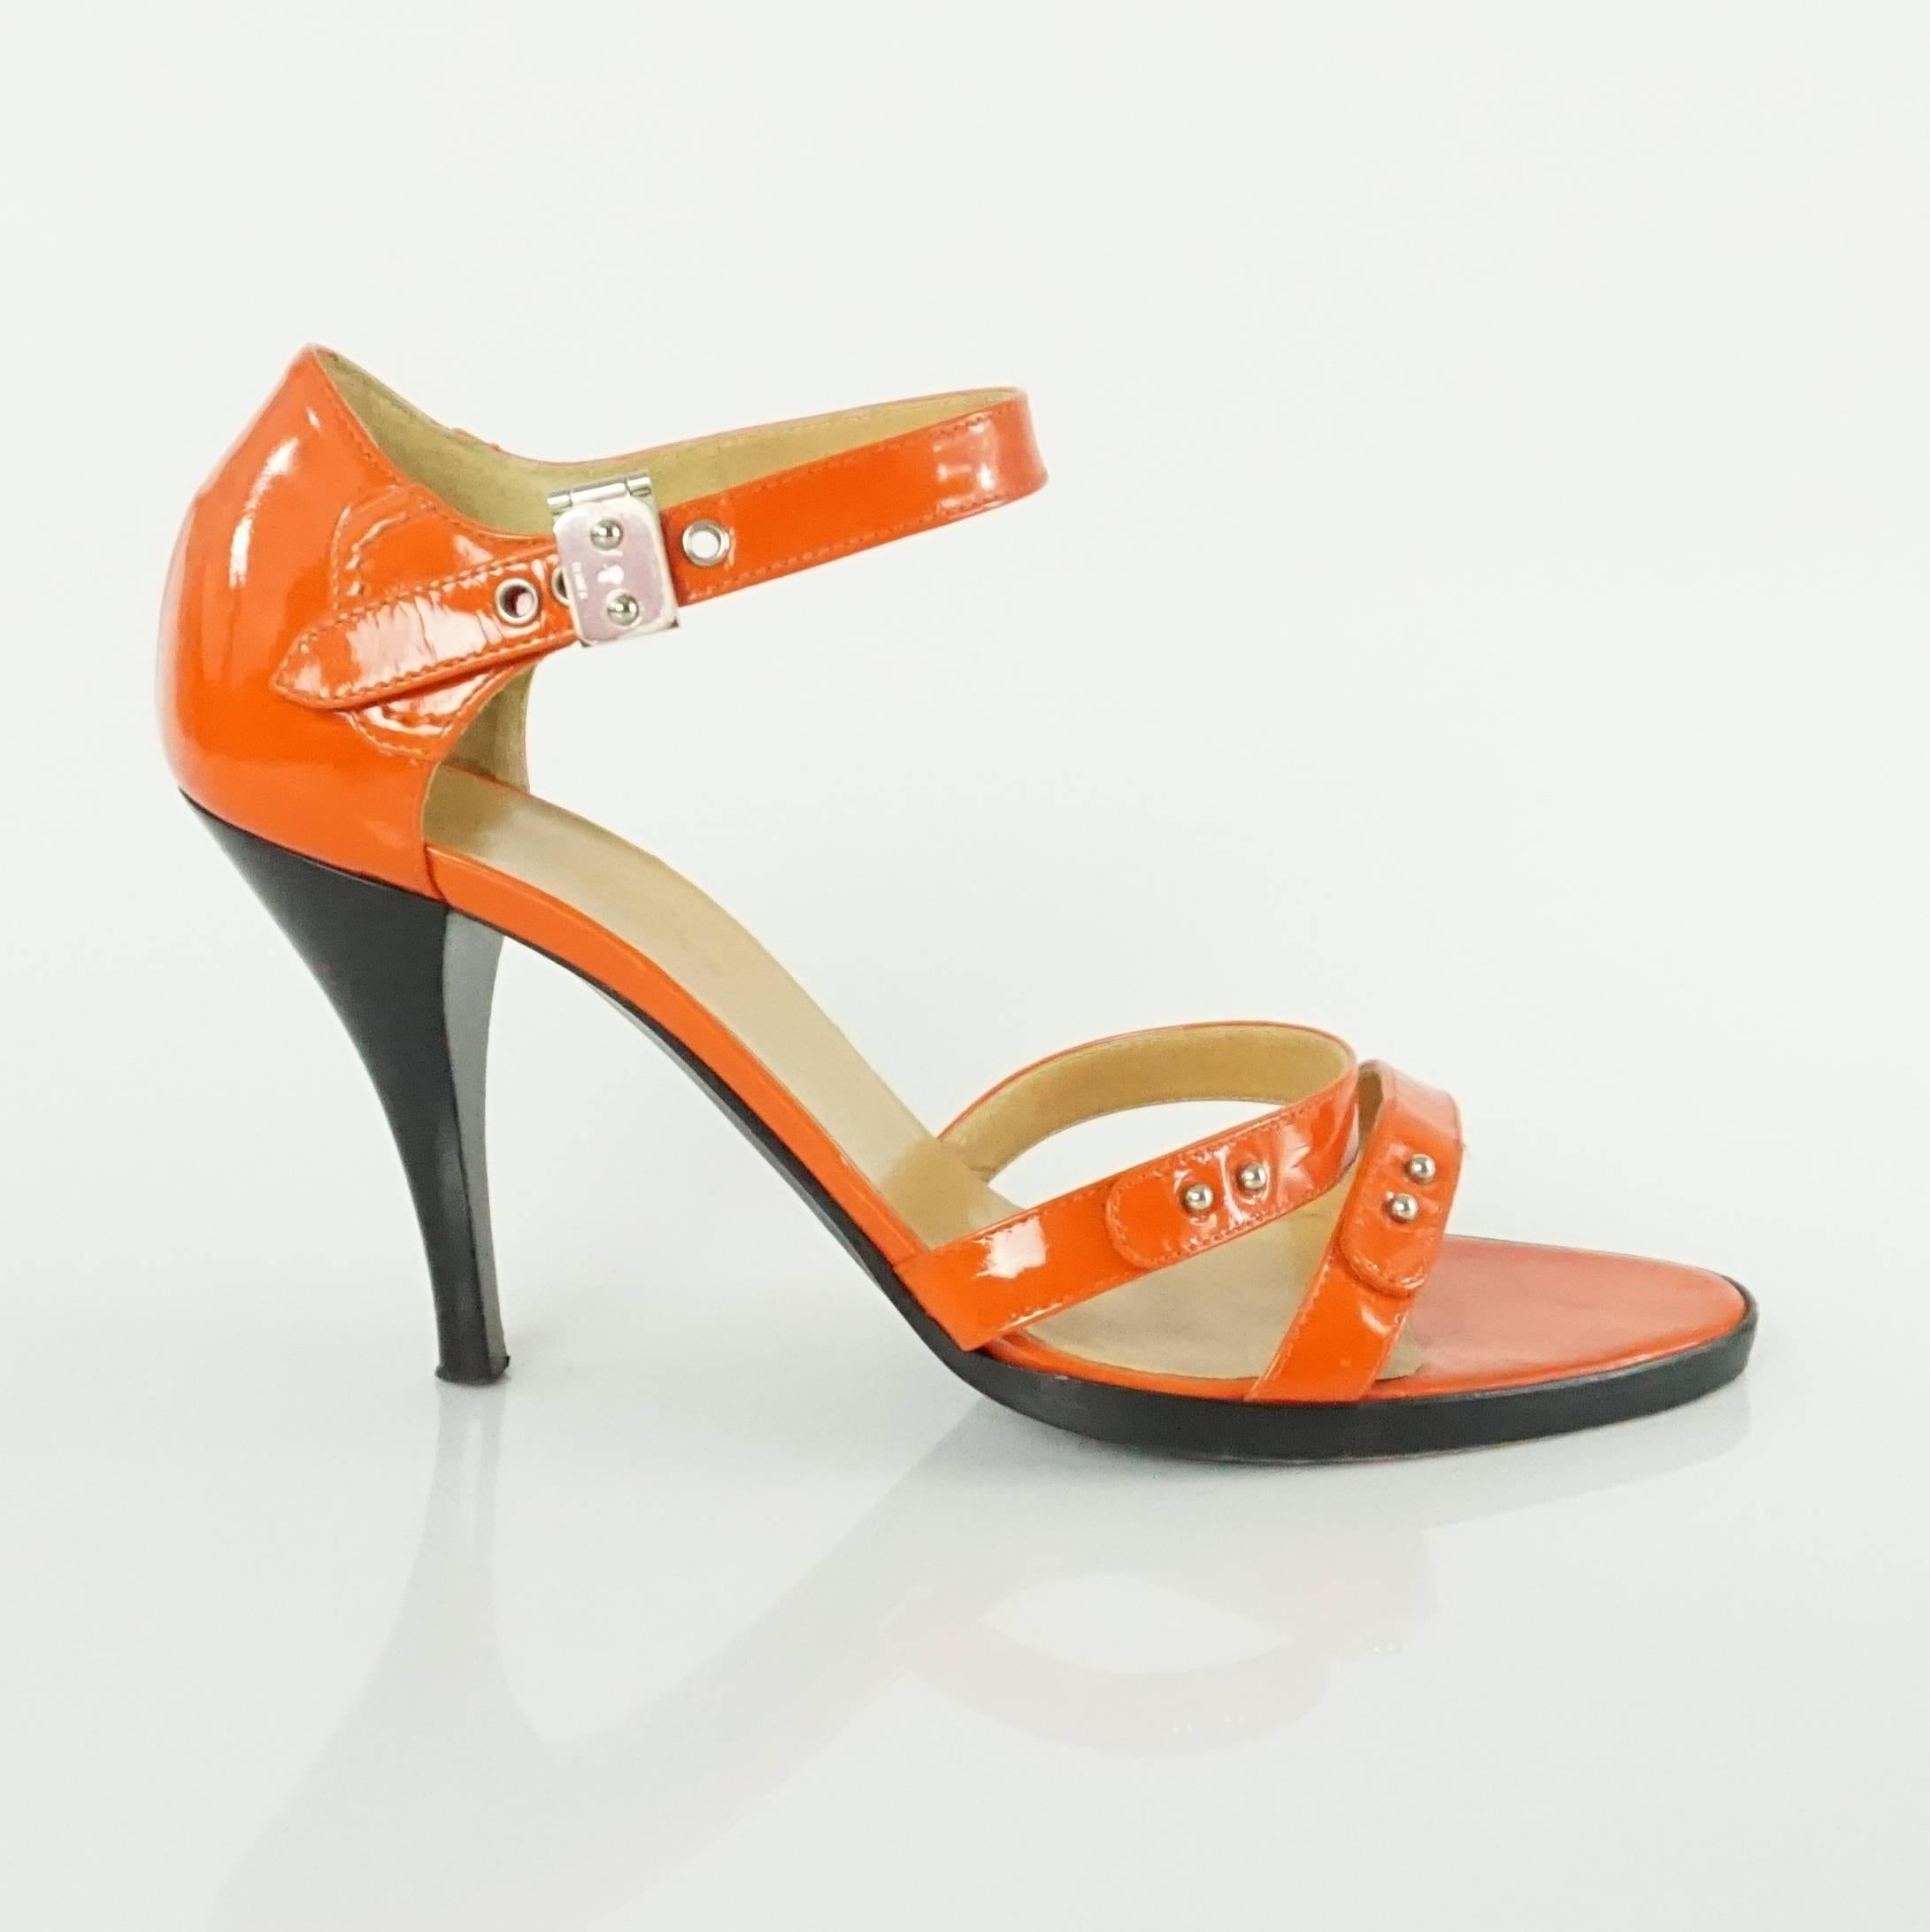 These Hermes orange patent heeled sandals are a fun pop of color. They have double straps in the front and an ankle strap with a silver Hermes signature closure. They are in very good condition with some wear at the ankle strap and bottom as seen in